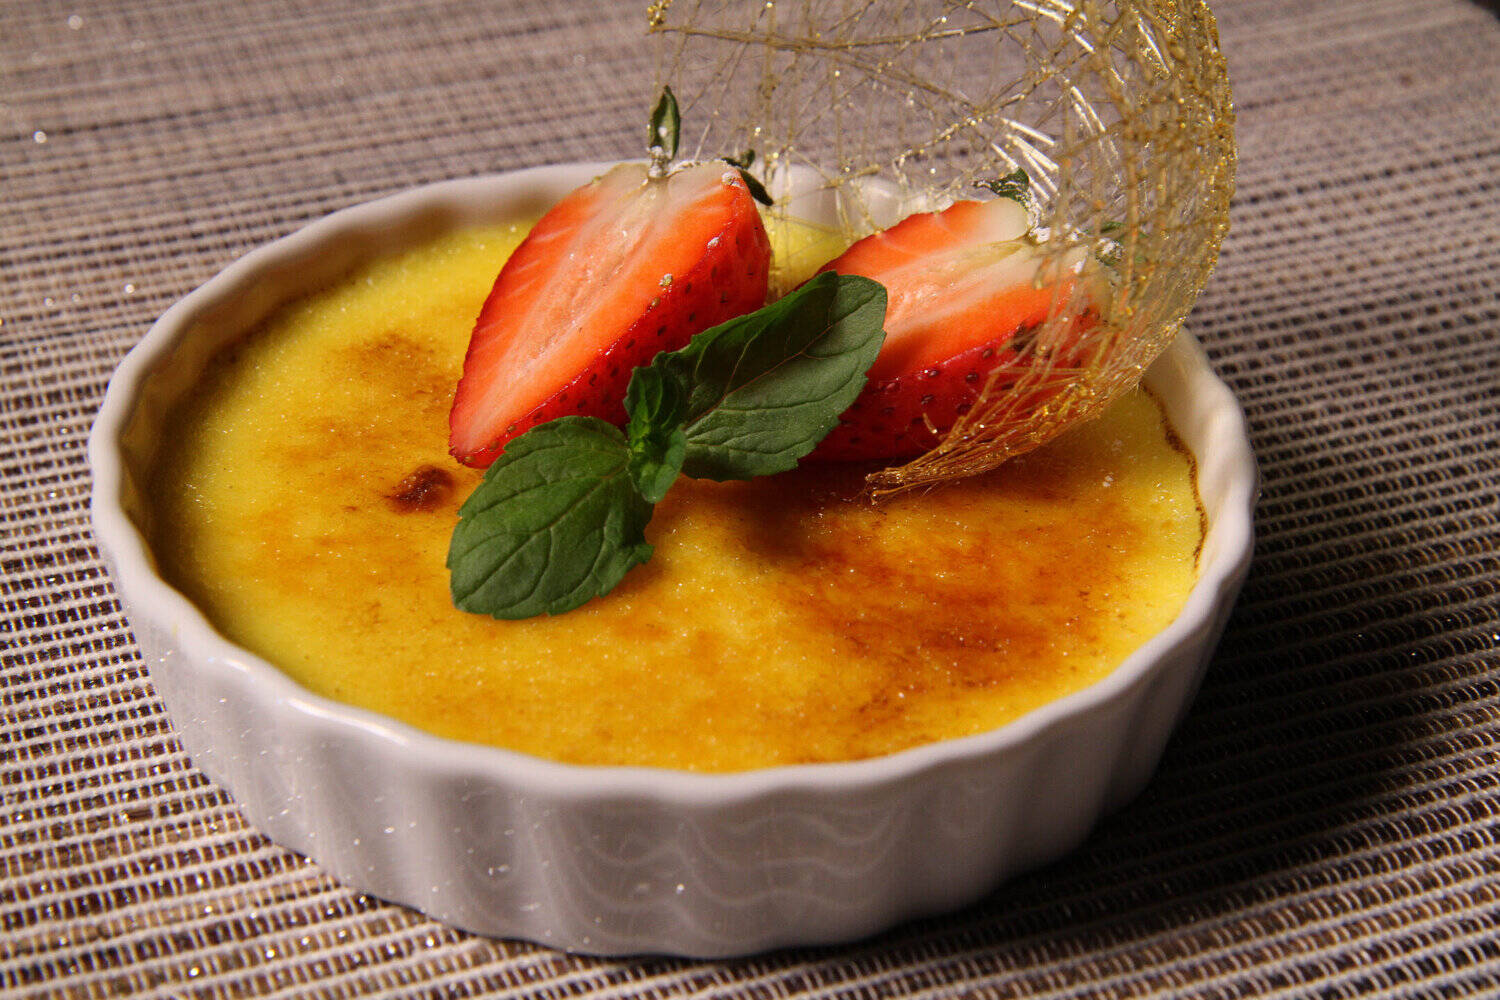 How To Store Creme Brulee